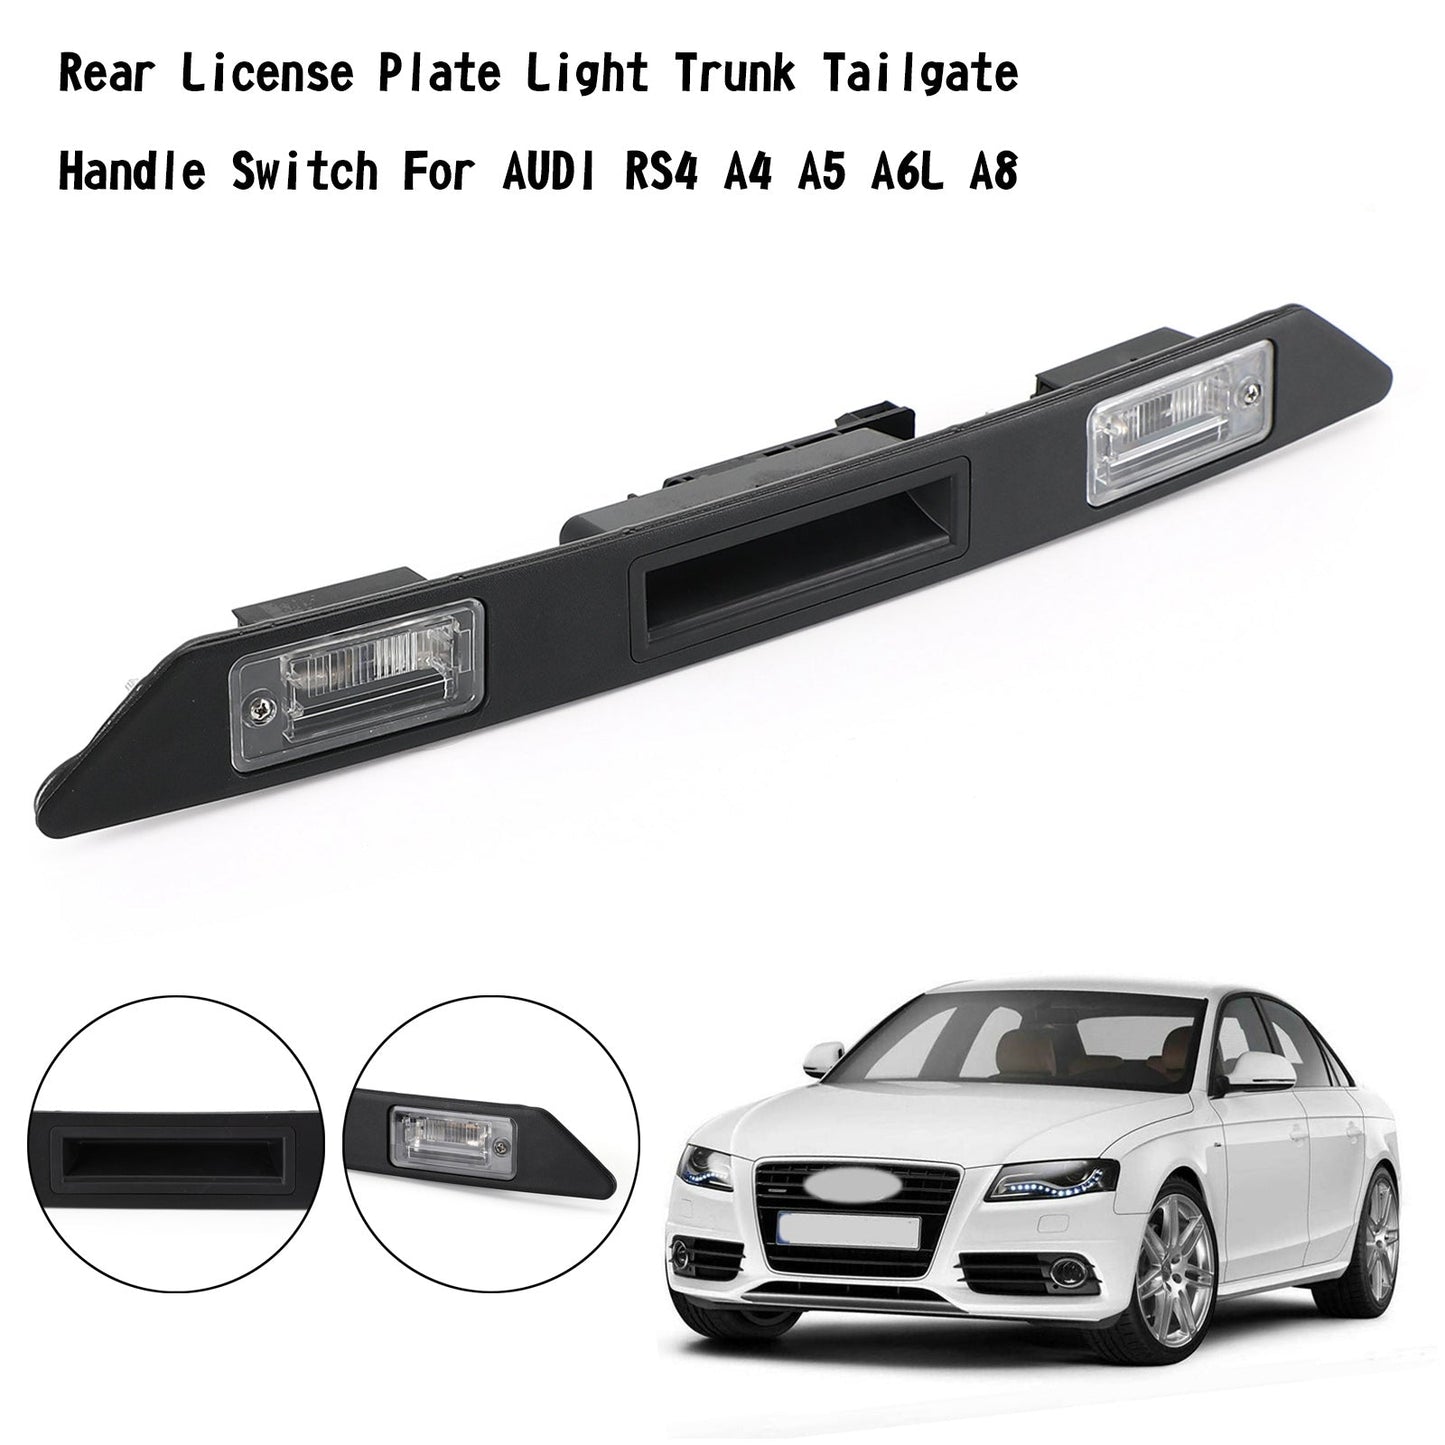 2001-2008 Audi A4/S5 Models Rear License Plate Light Trunk Tailgate Handle Switch 8P48275743FZ